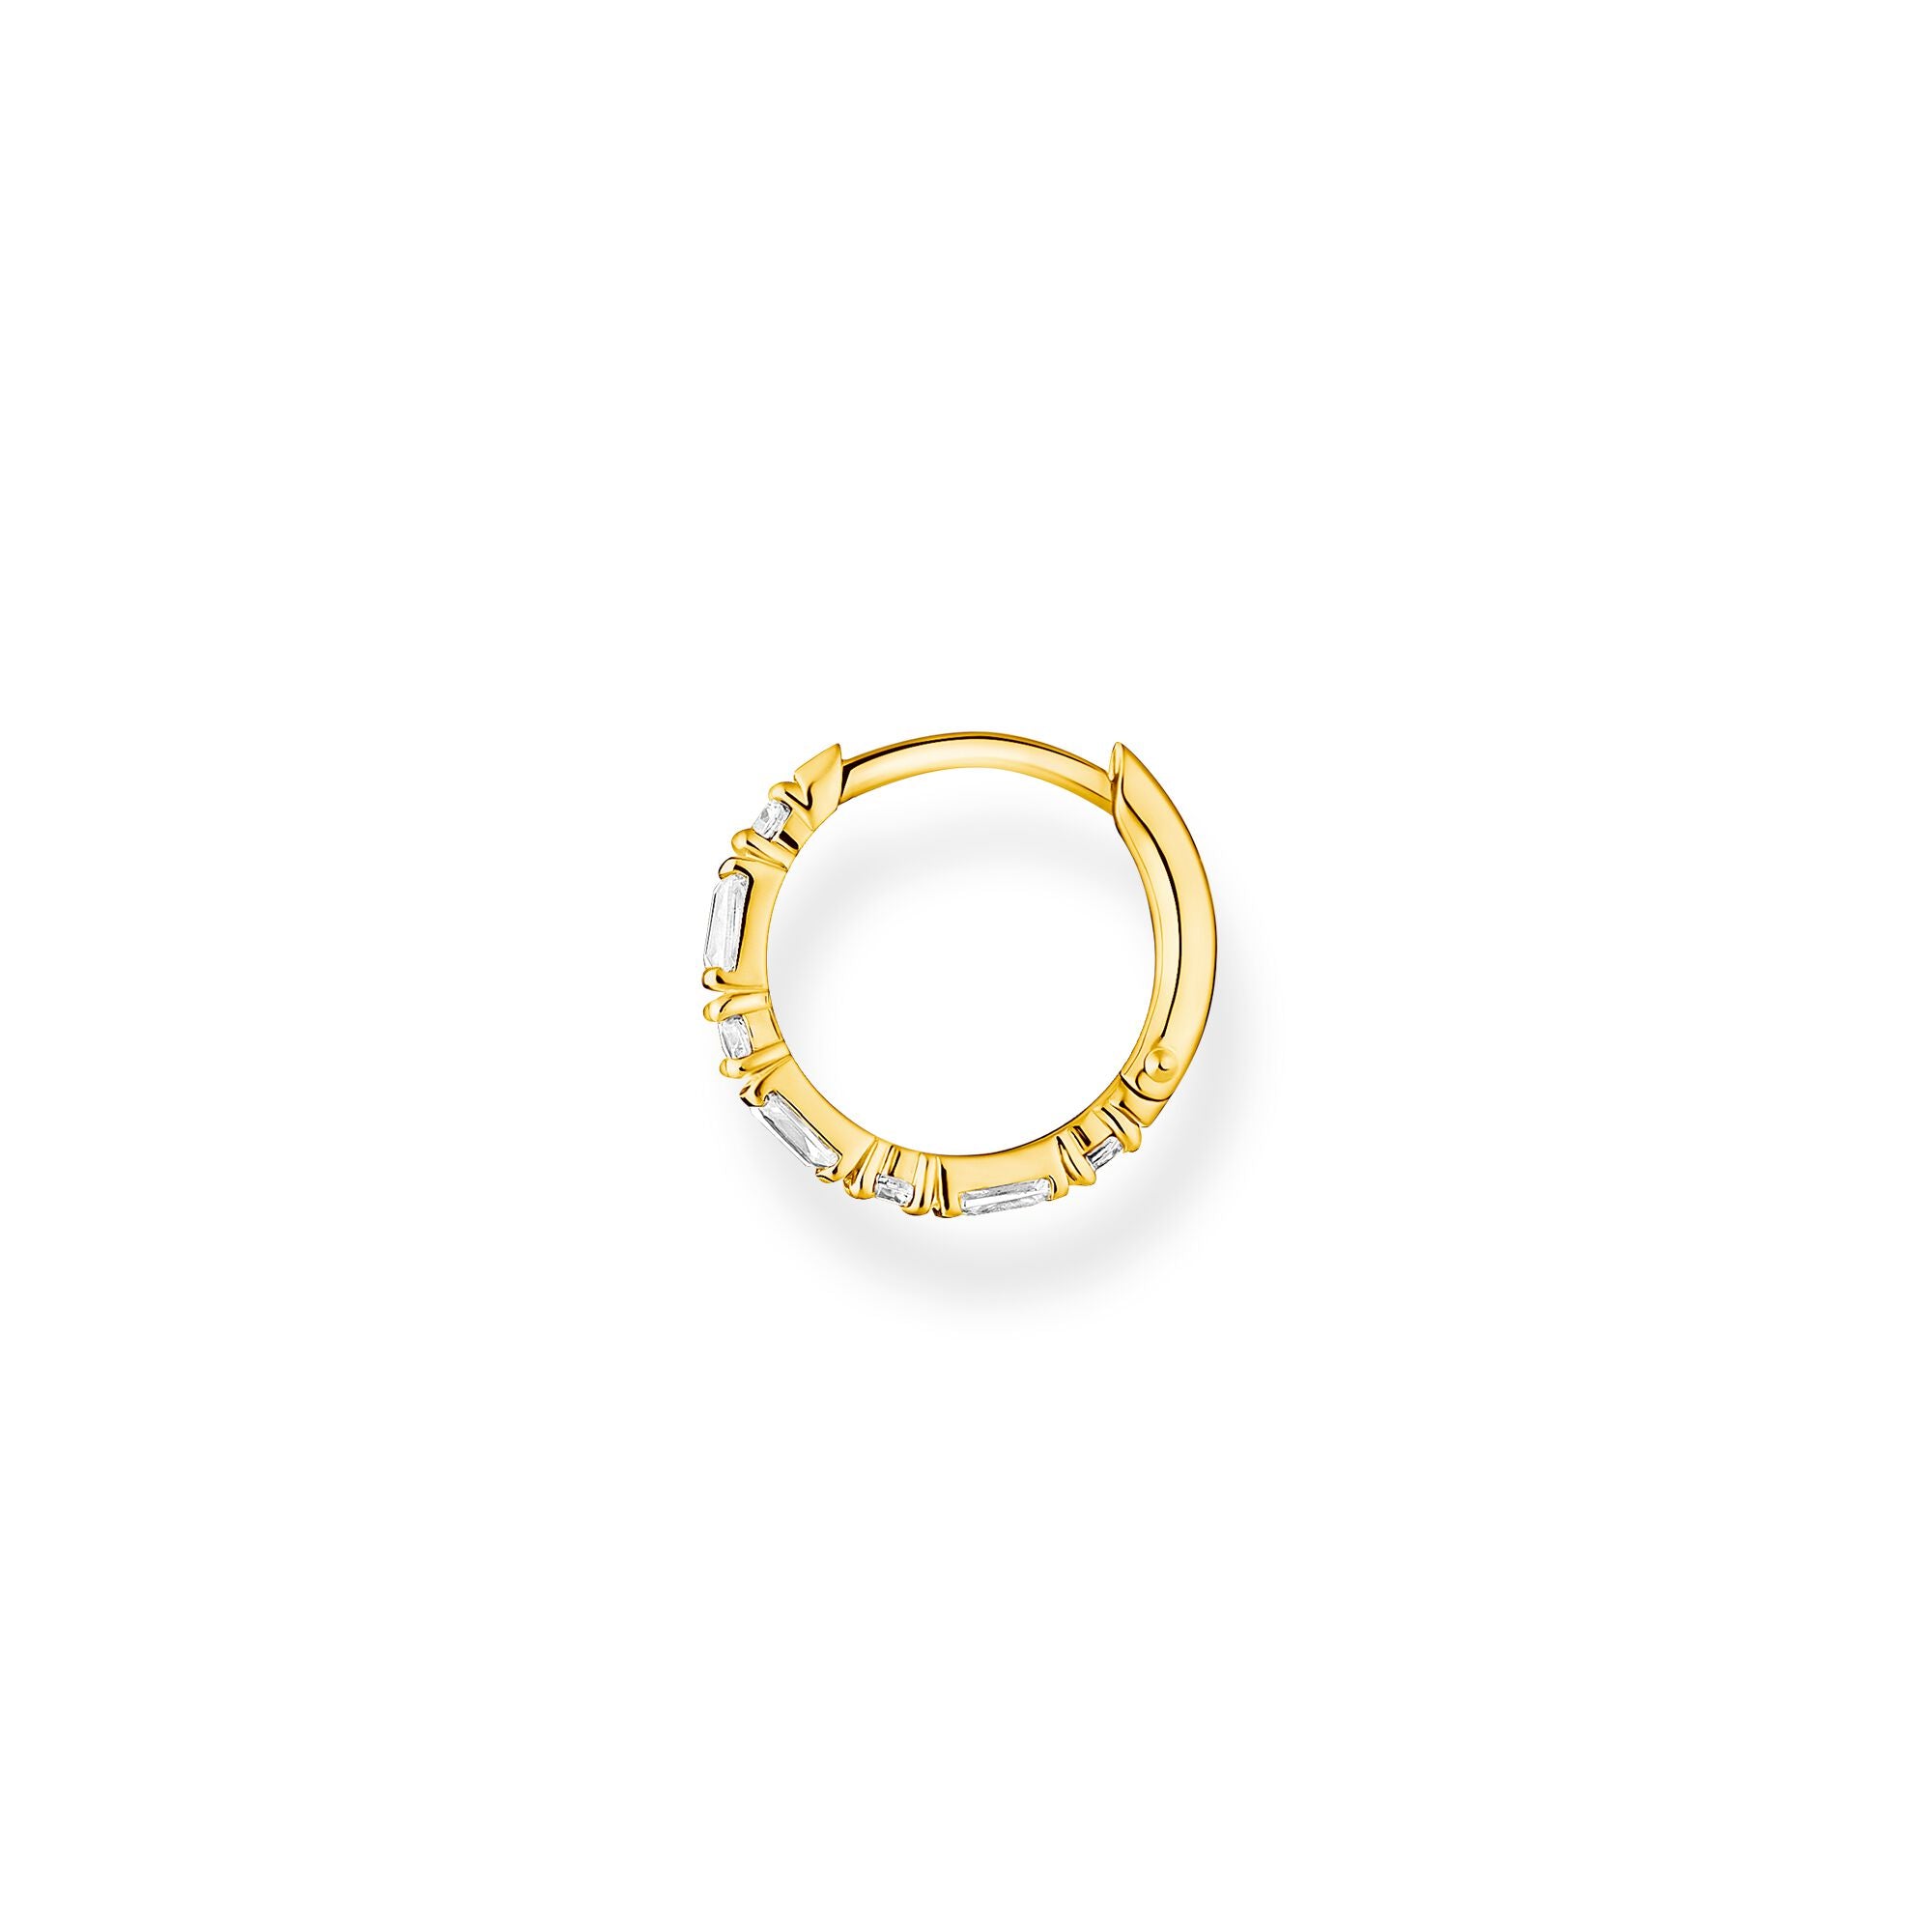 Single Hoop Earring Baguette And Round Cut White Stones - Gold